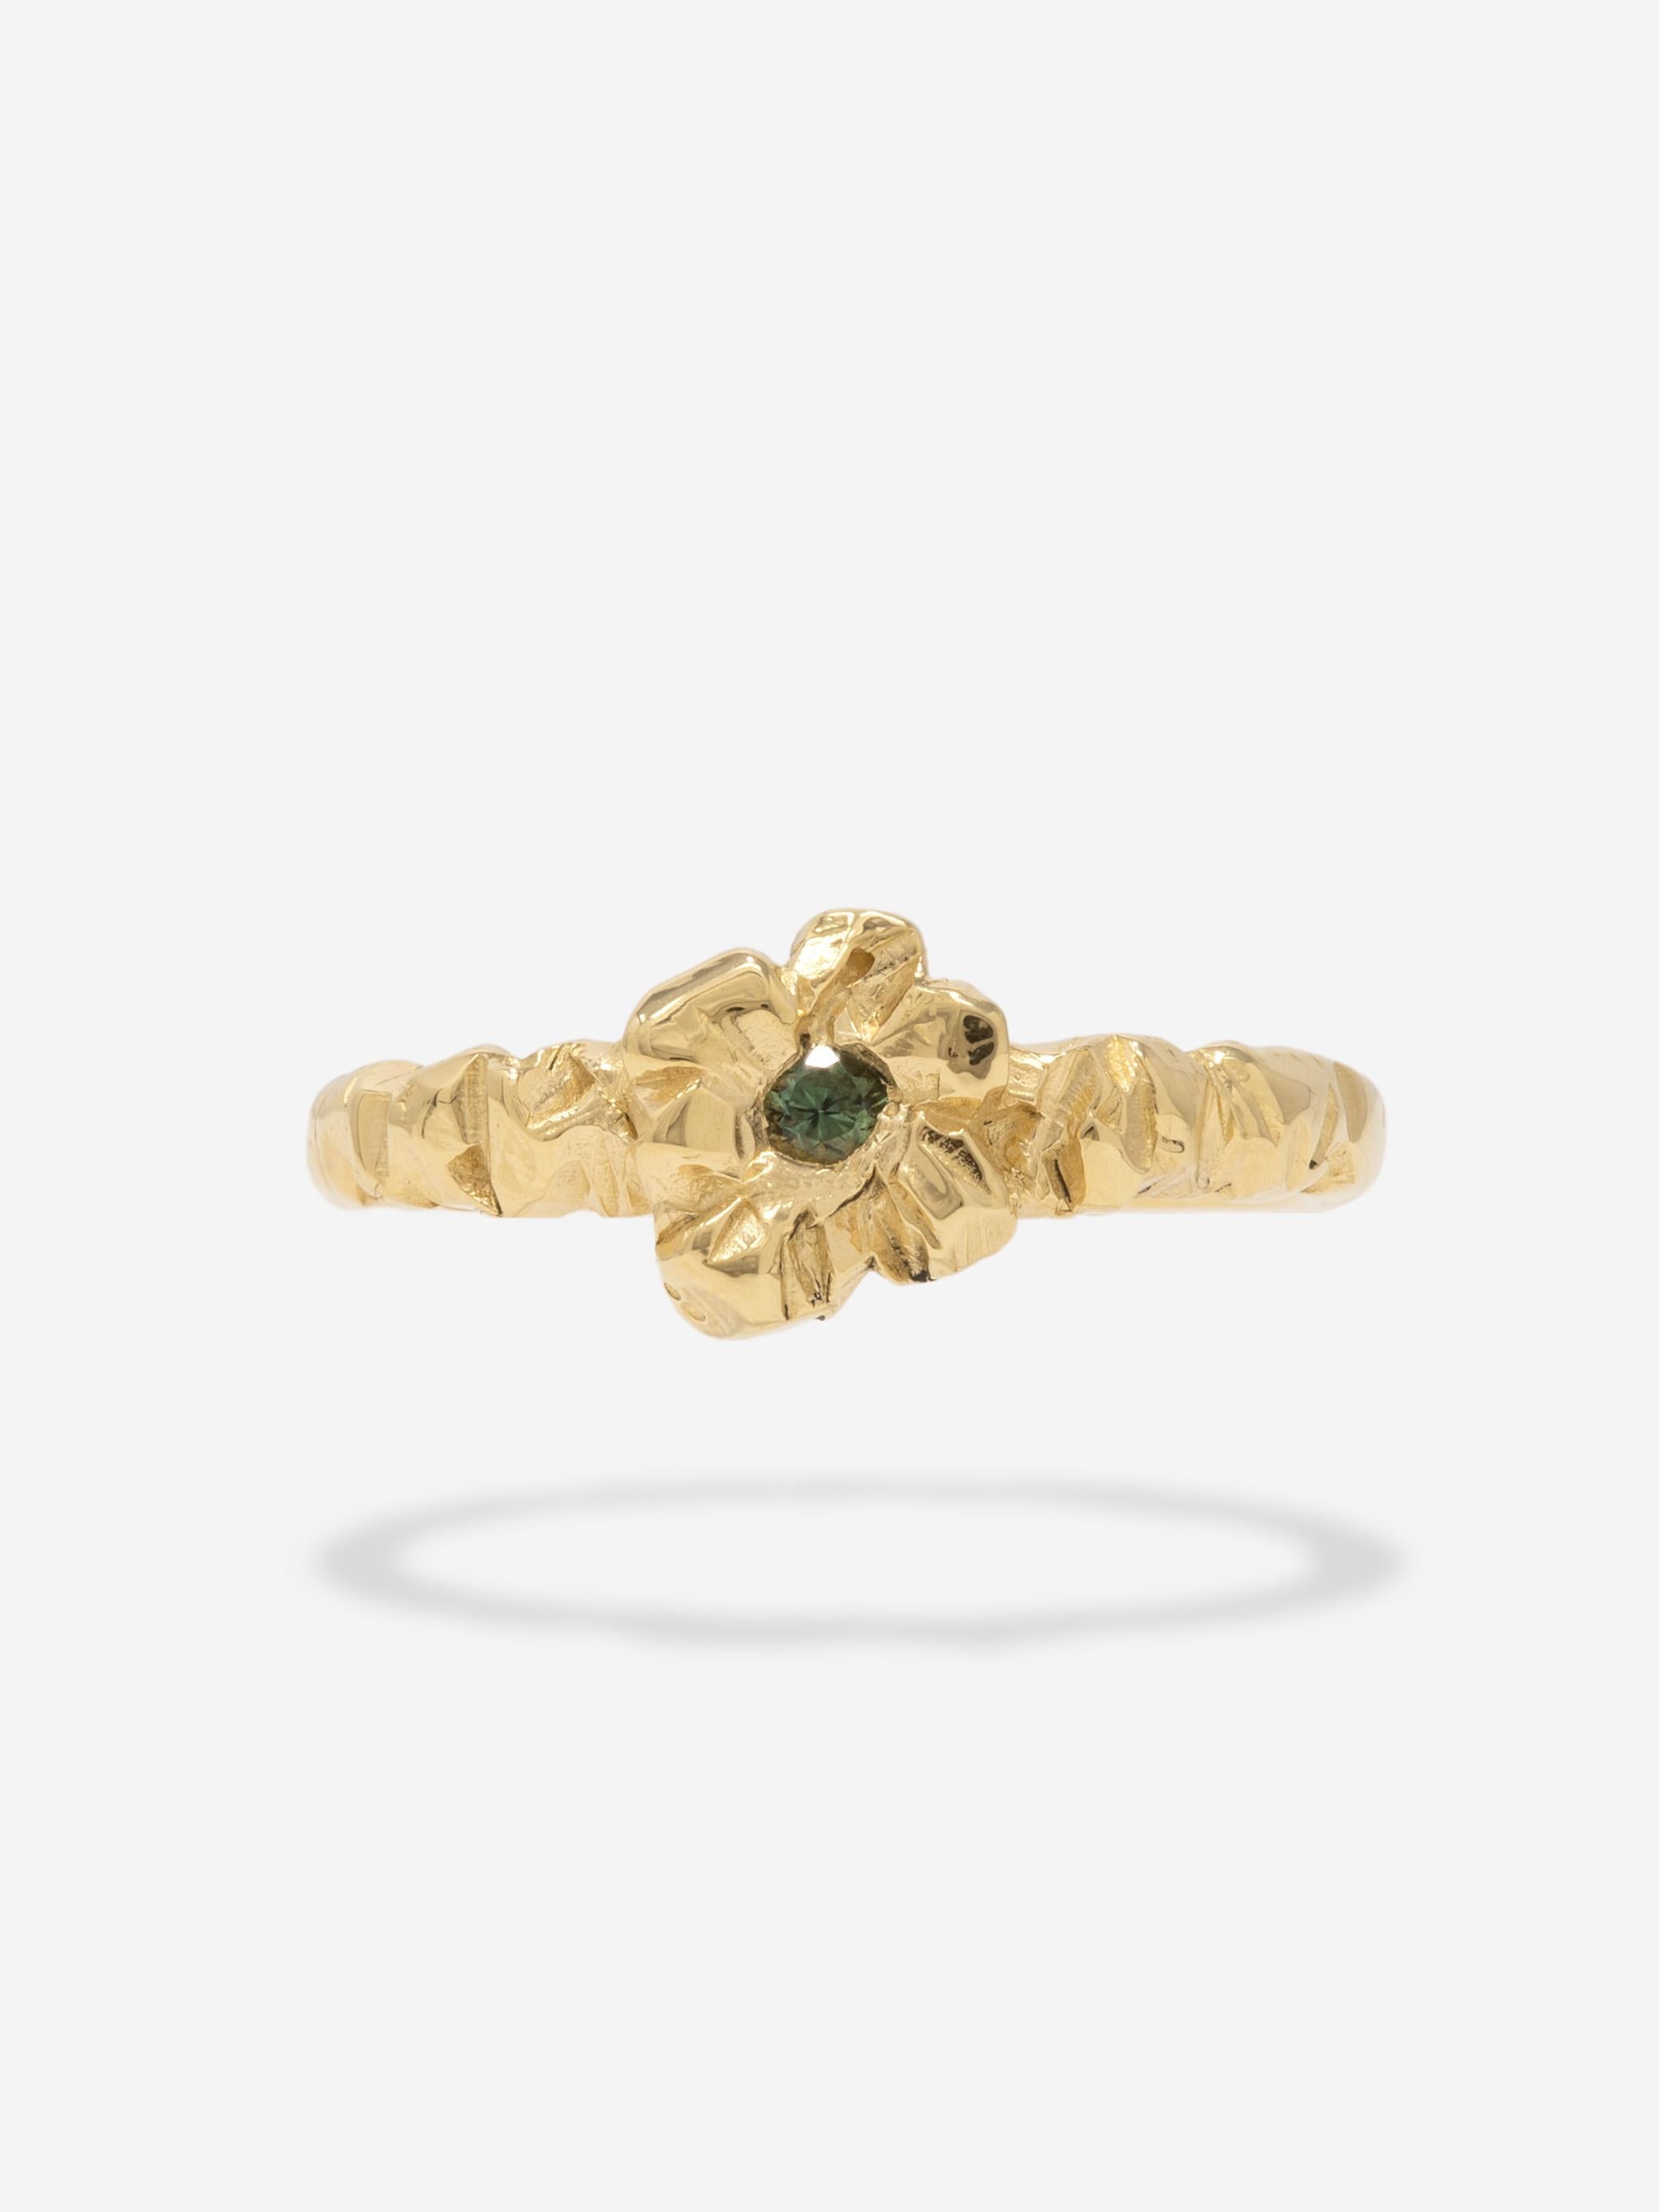 CAPTIVE - A one-of-a-kind hand carved ring cast in solid 18k gold and set with a 2.5mm Montana sapphire. The ring features Captive's distinctive Ruin texture shaped in a floral setting.